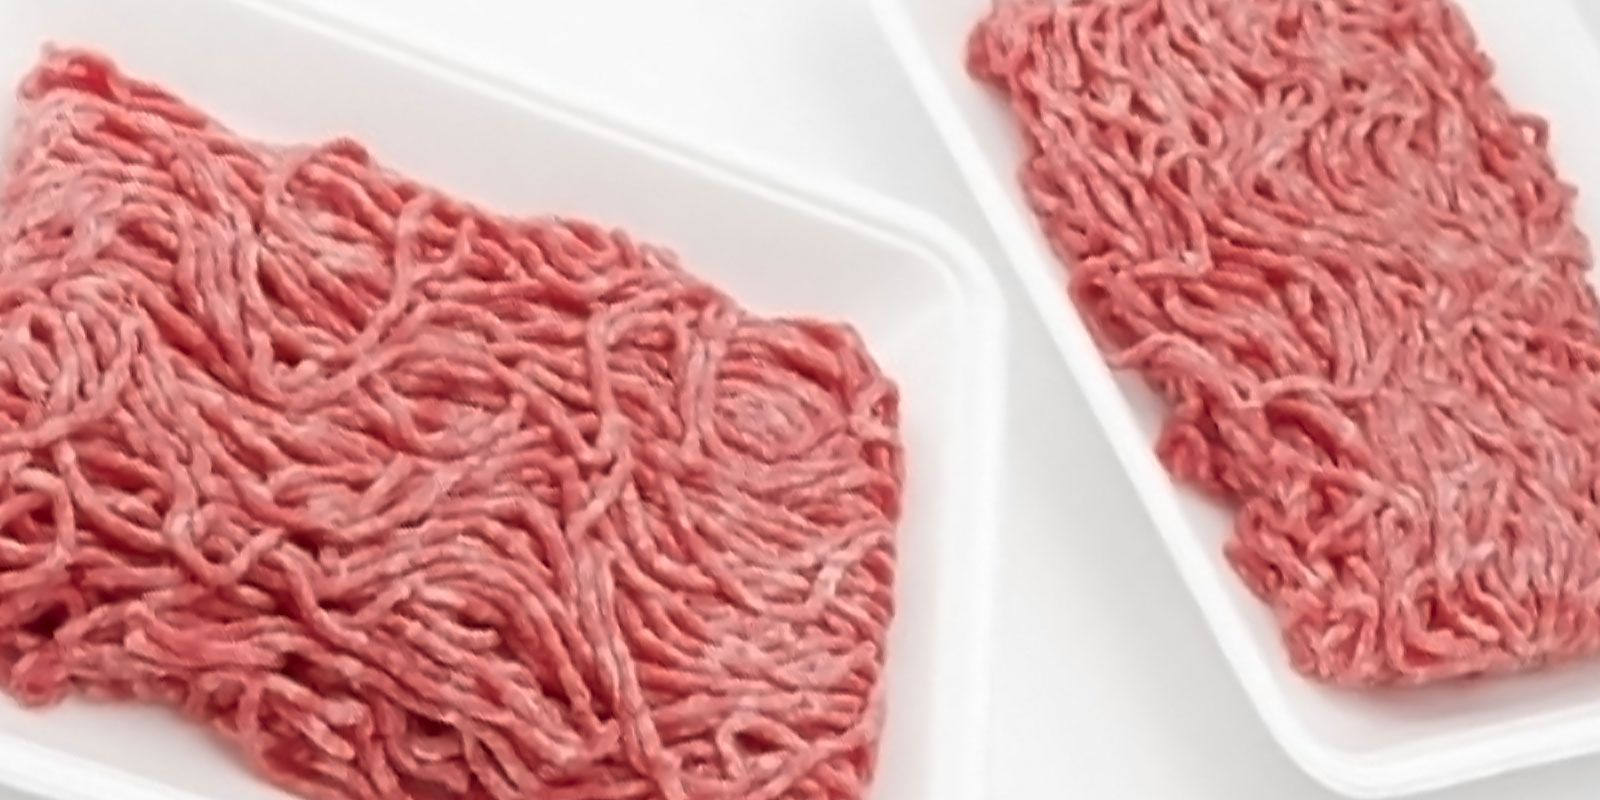 Ground Beef Recall Issued After E. Coli Outbreak Sickens 18, Kills 1